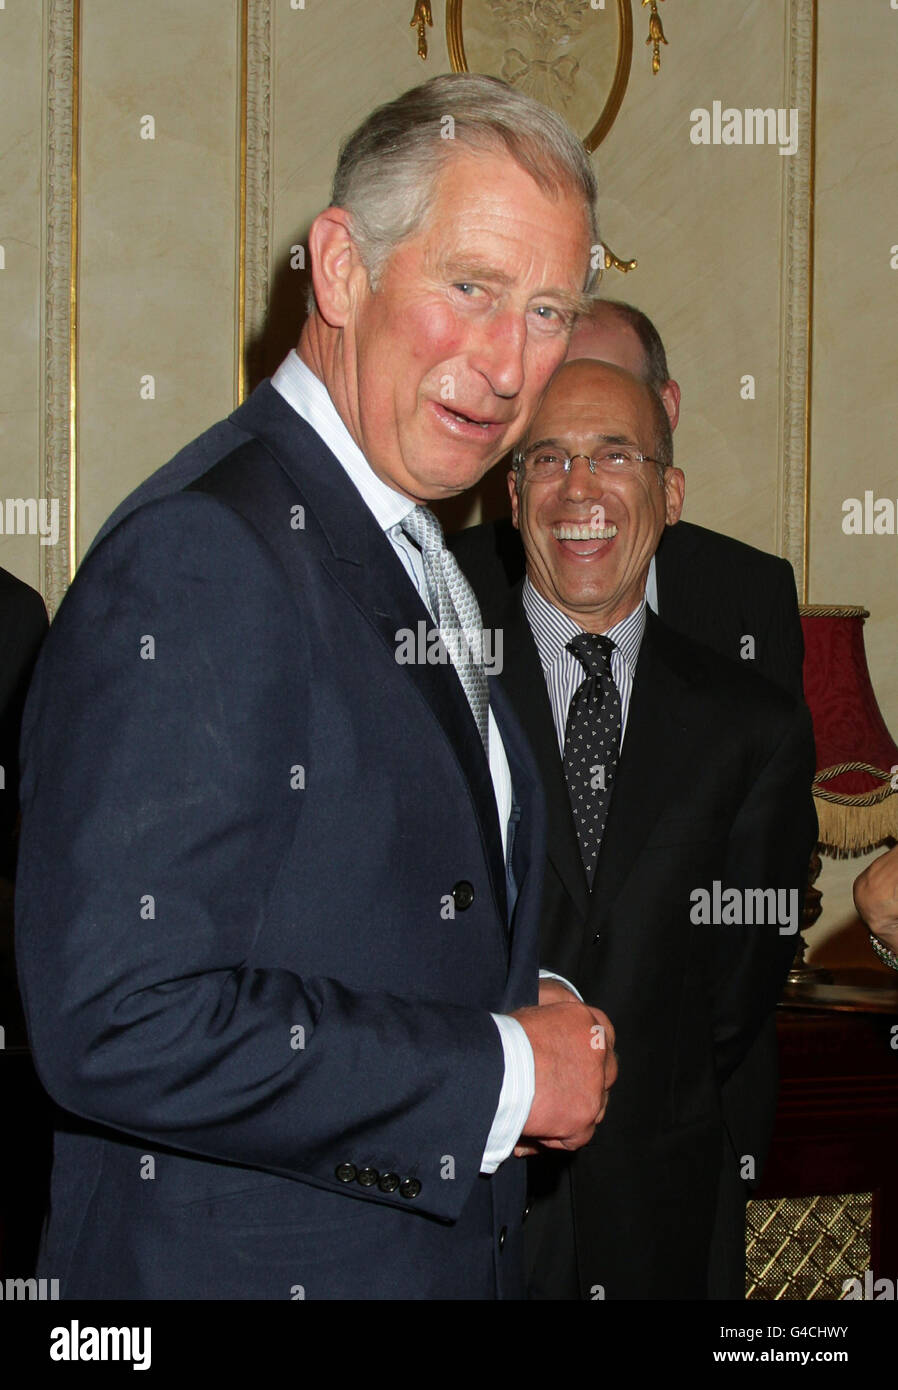 The Prince of Wales greets Jeffrey Katzenberg, CEO of DreamWorks Animation, at a special performance of Shrek The Musical at the Theatre Royal in Drury Lane, London. Stock Photo